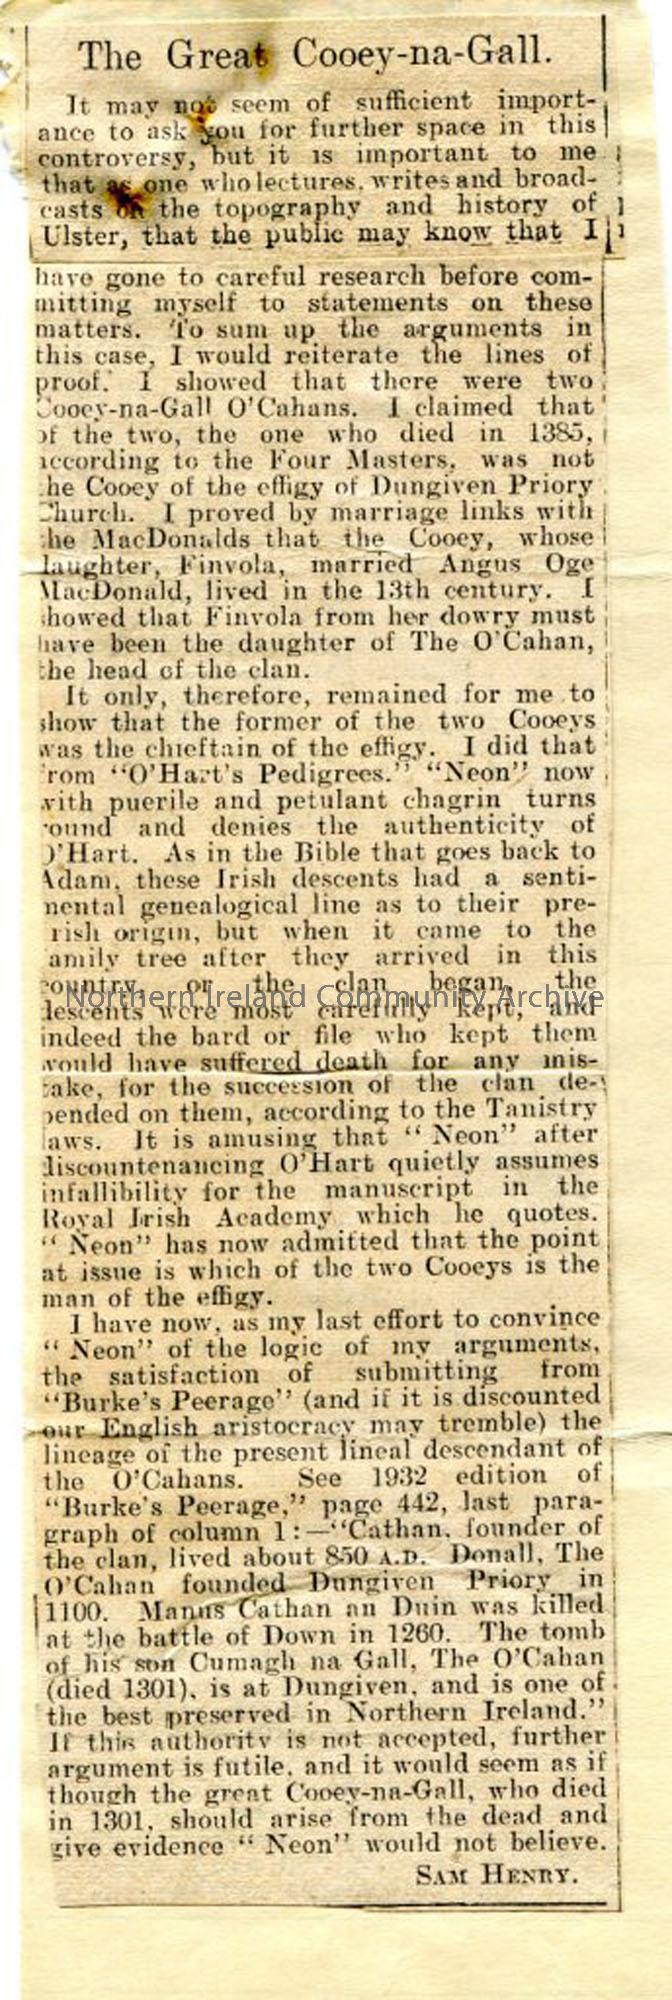 Newspaper cutting. letter from Sam Henry, ‘titled ‘The Great Cooey-na-gall’